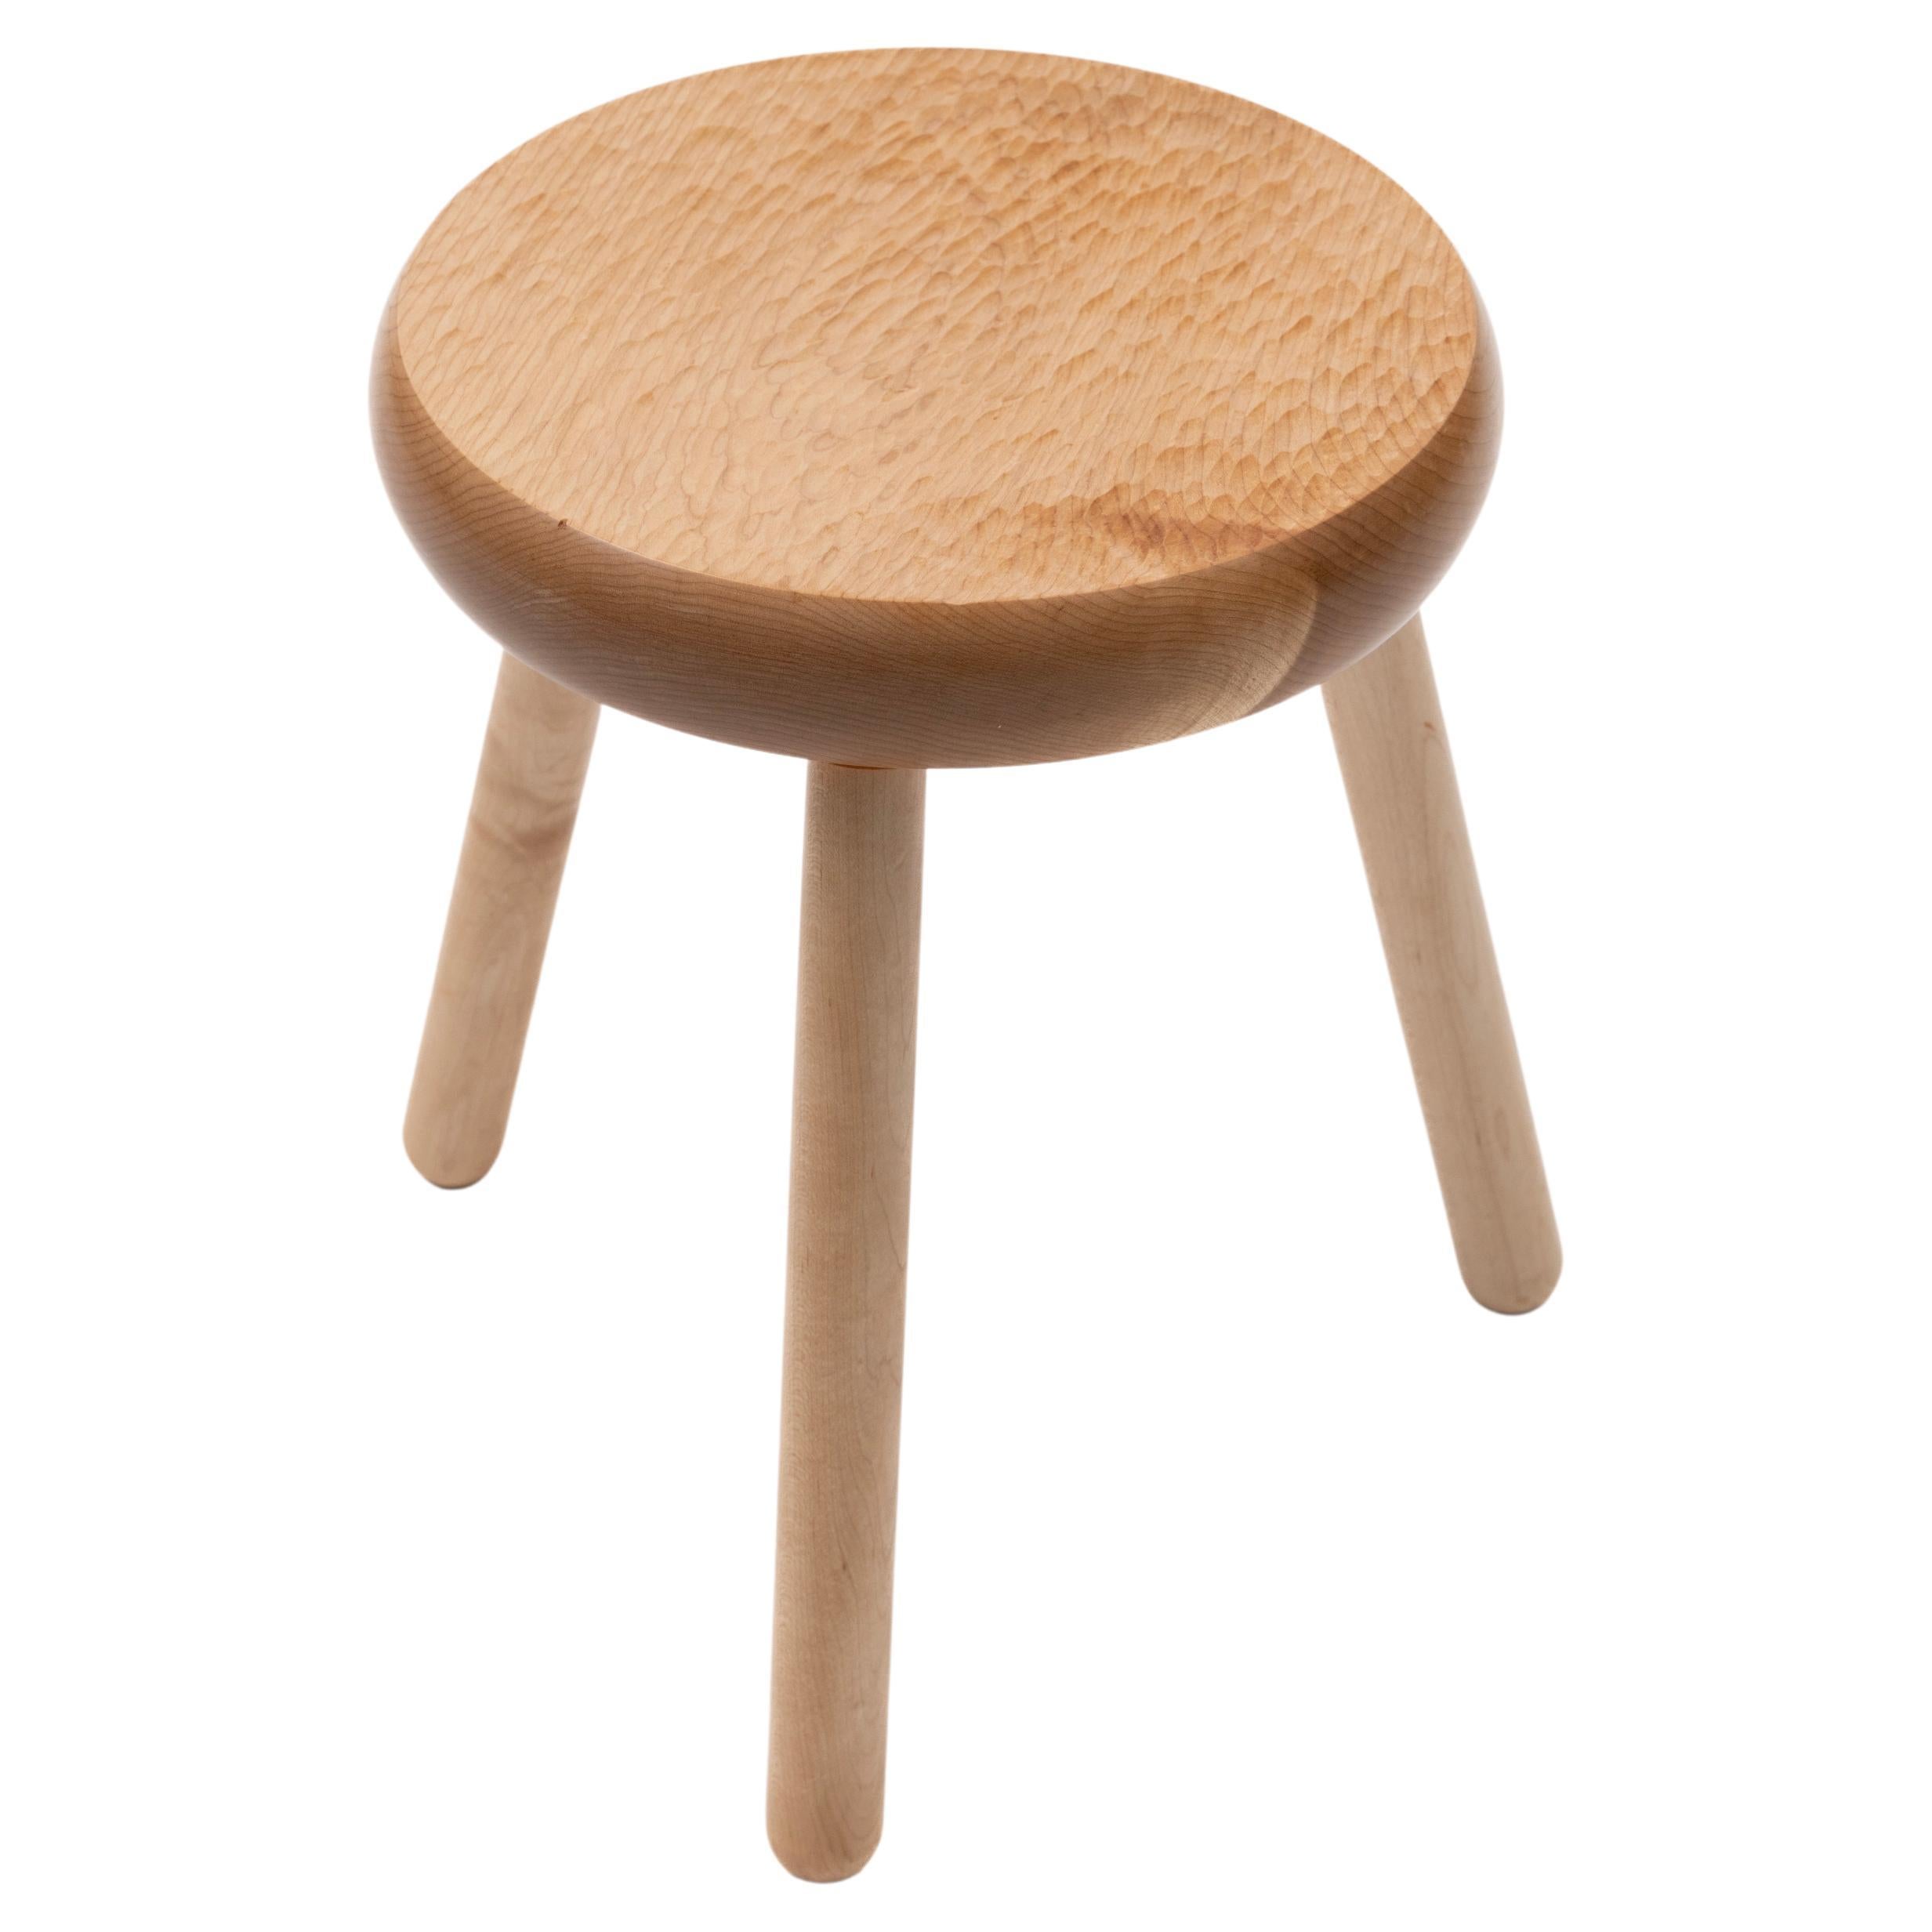 A versatile piece of furniture, the Dibbet Stool functions as seating, an ottoman, or a side table. Reminiscent of Shaker or early Frontier furniture. The thick seat is hand carved with a slight concave that leaves a tactile and smooth texture. The